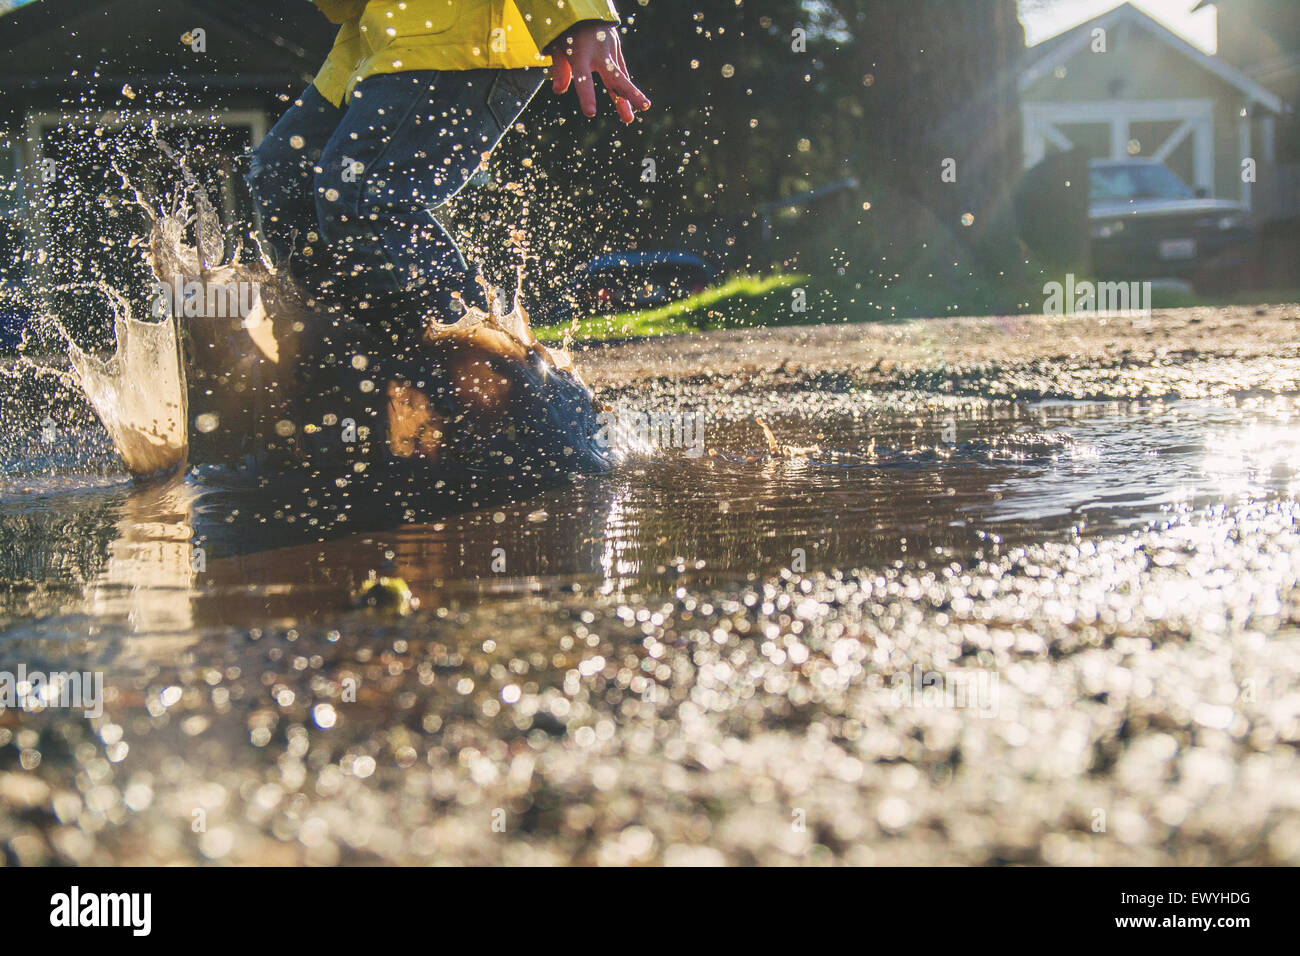 Boy jumping in puddle of muddy water Stock Photo